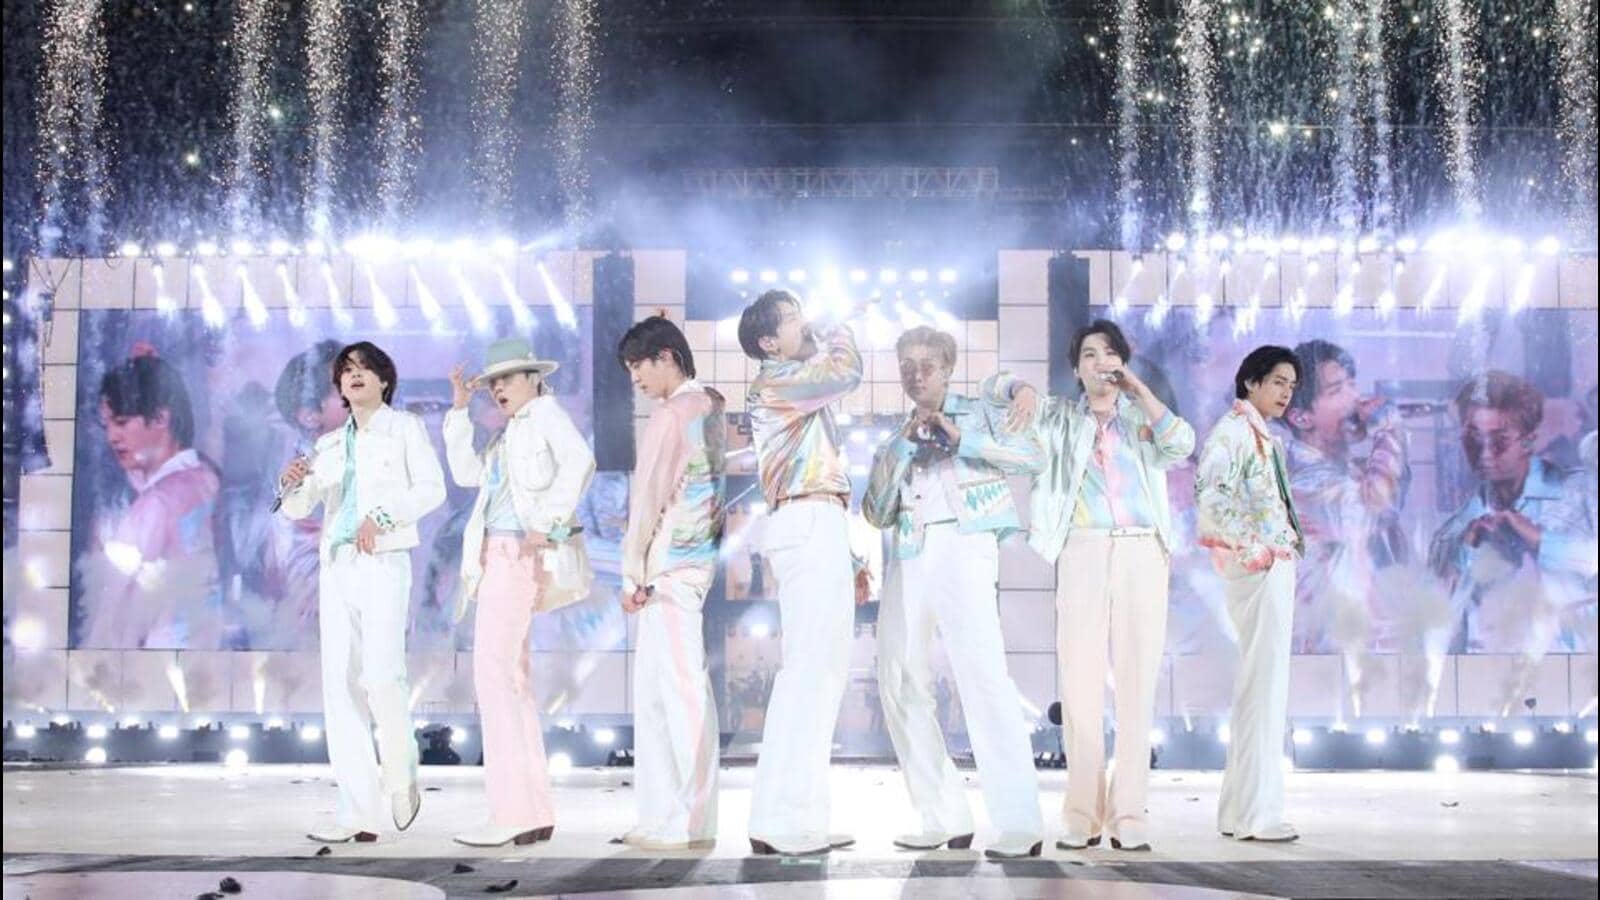 Low on cheers, not on noise: BTS promises ‘better days ahead’ as they return for live concert in South Korea